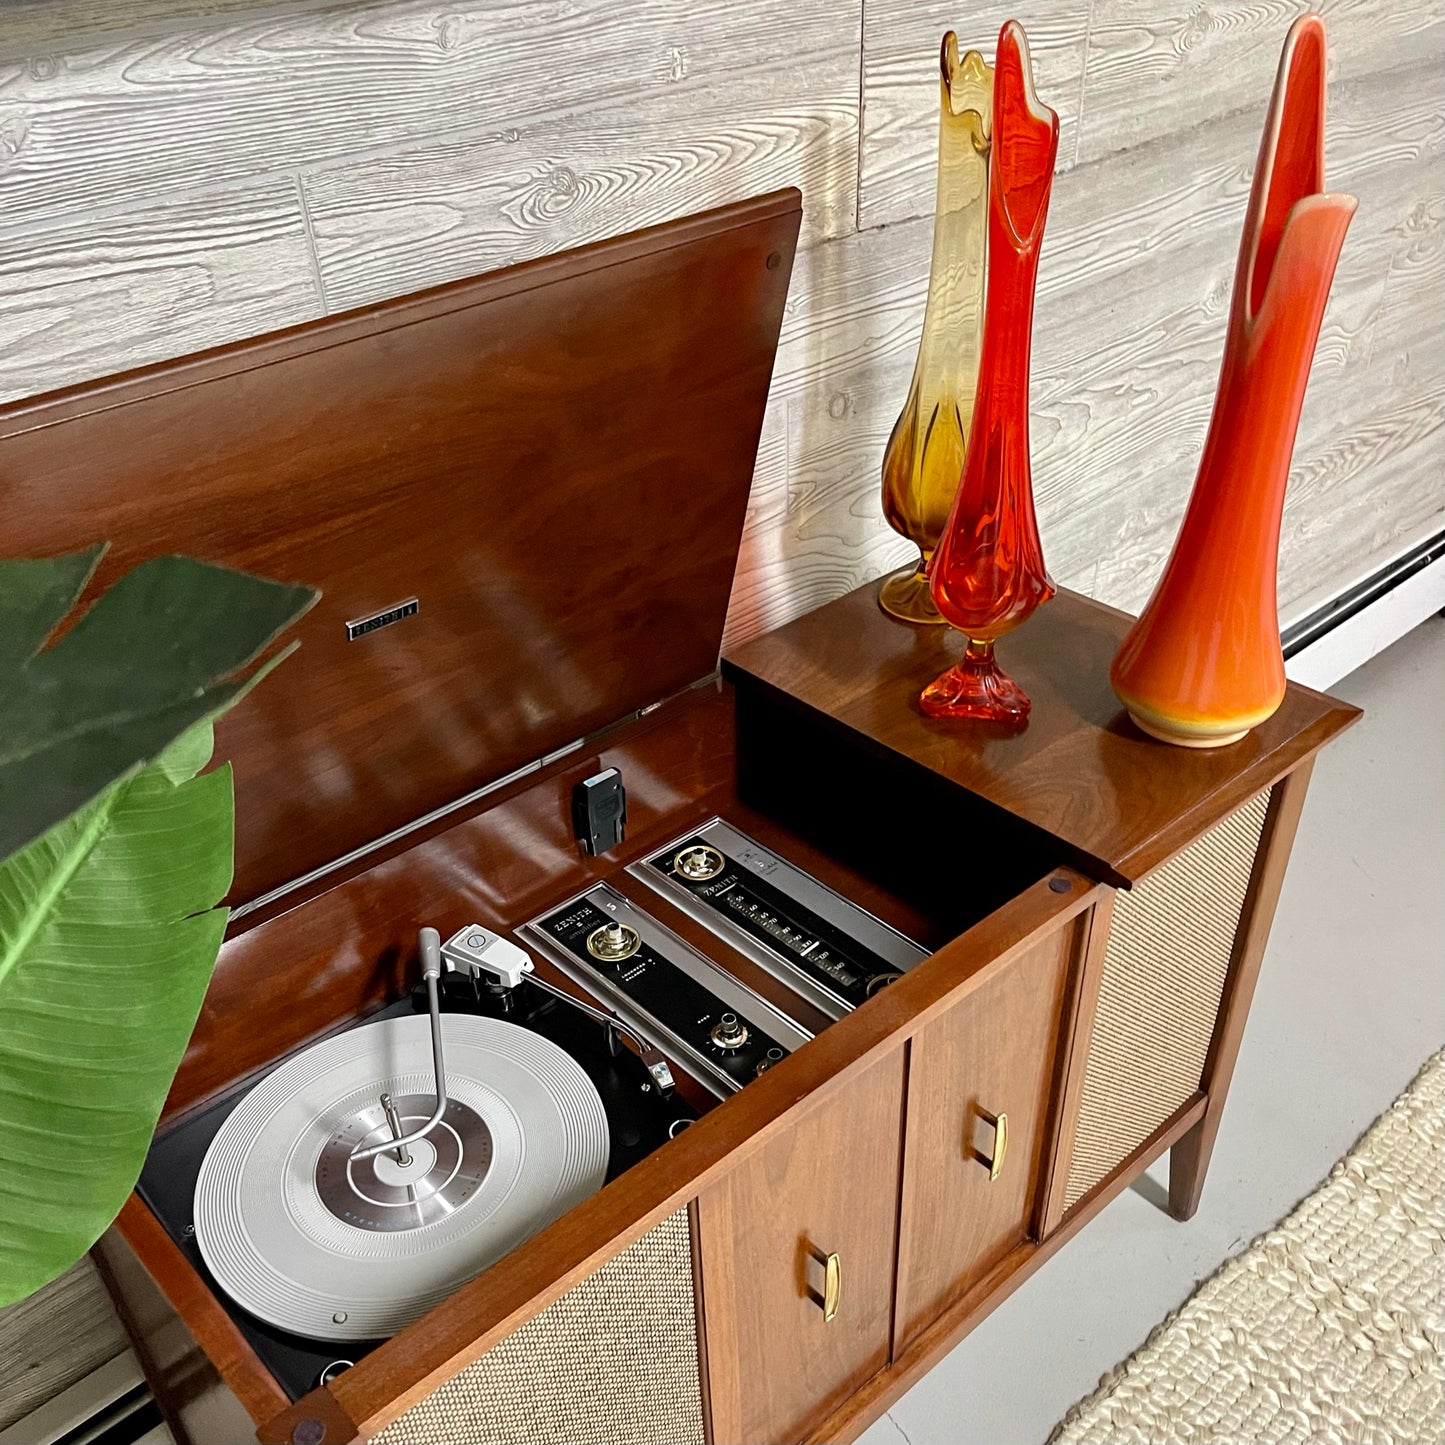 ZENITH Solid State Record Player Stereo Console Changer AM FM Bluetooth Alexa The Vintedge Co.